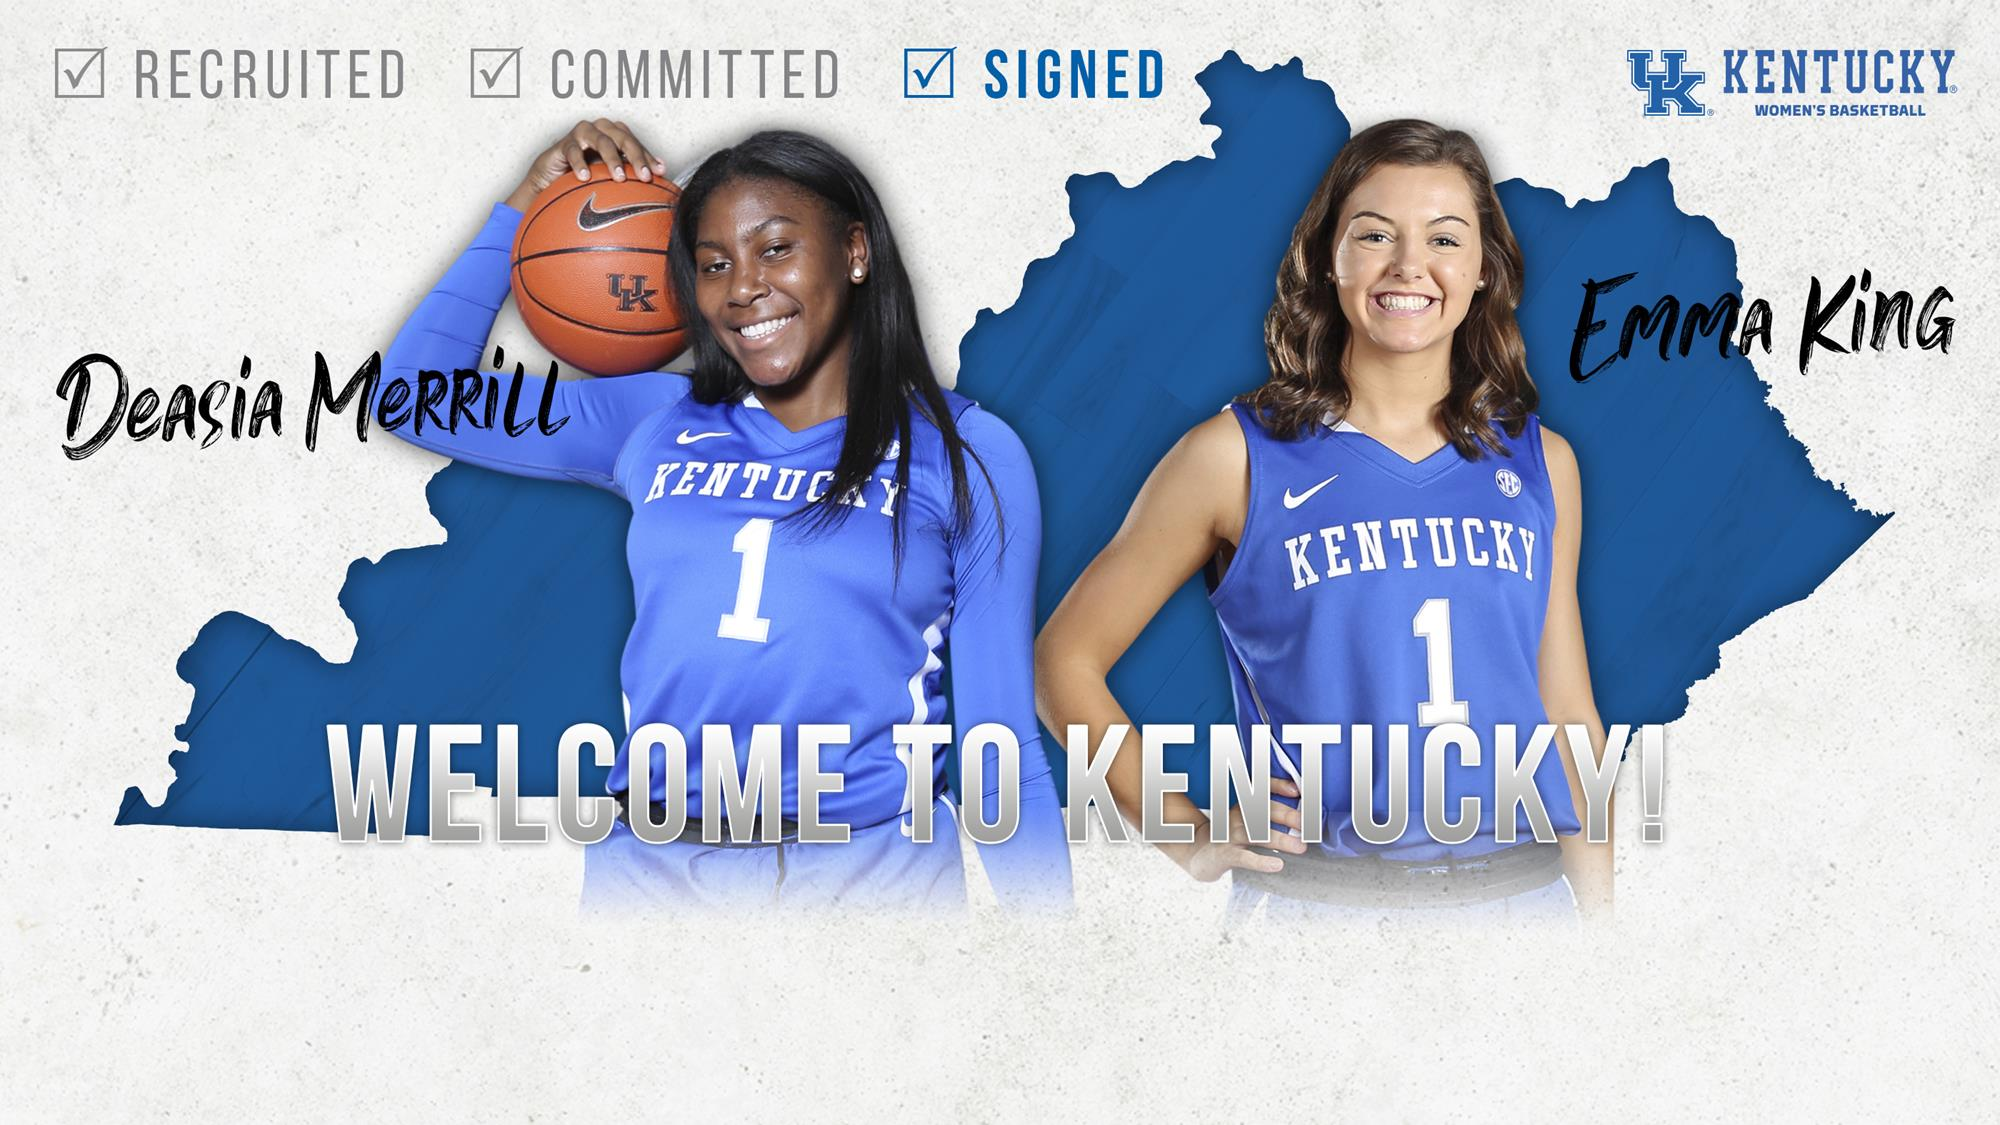 Emma King, Deasia Merrill Sign with Kentucky WBB for 2019